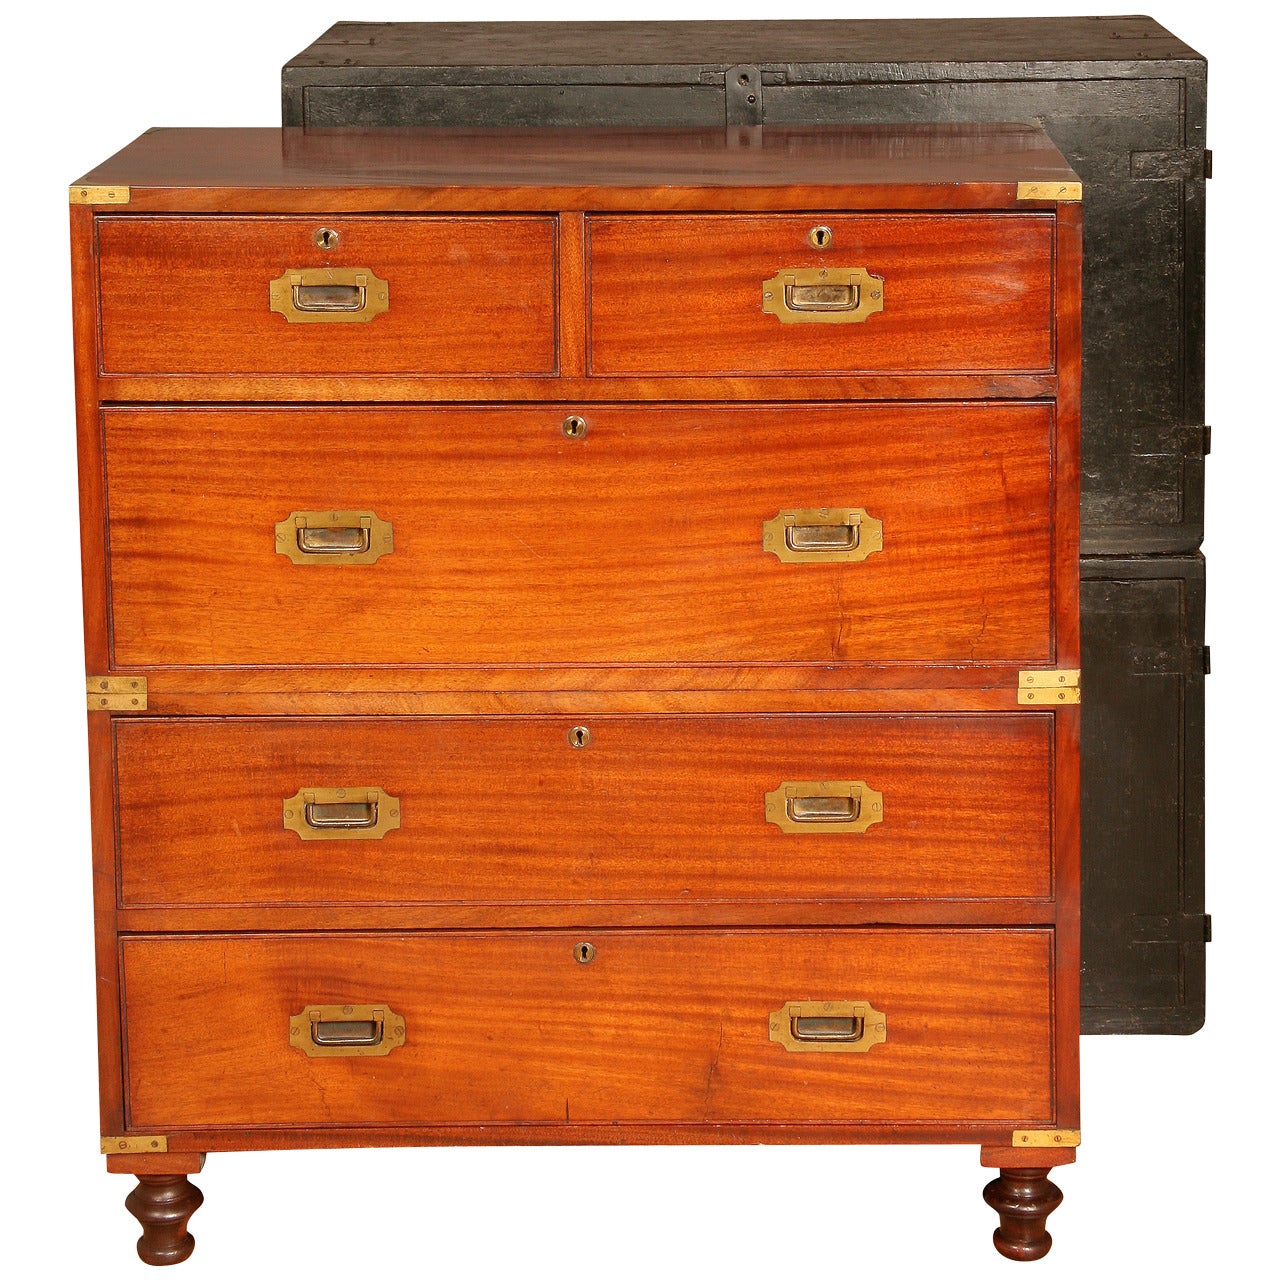 Campaign Chest with Packing Cases For Sale